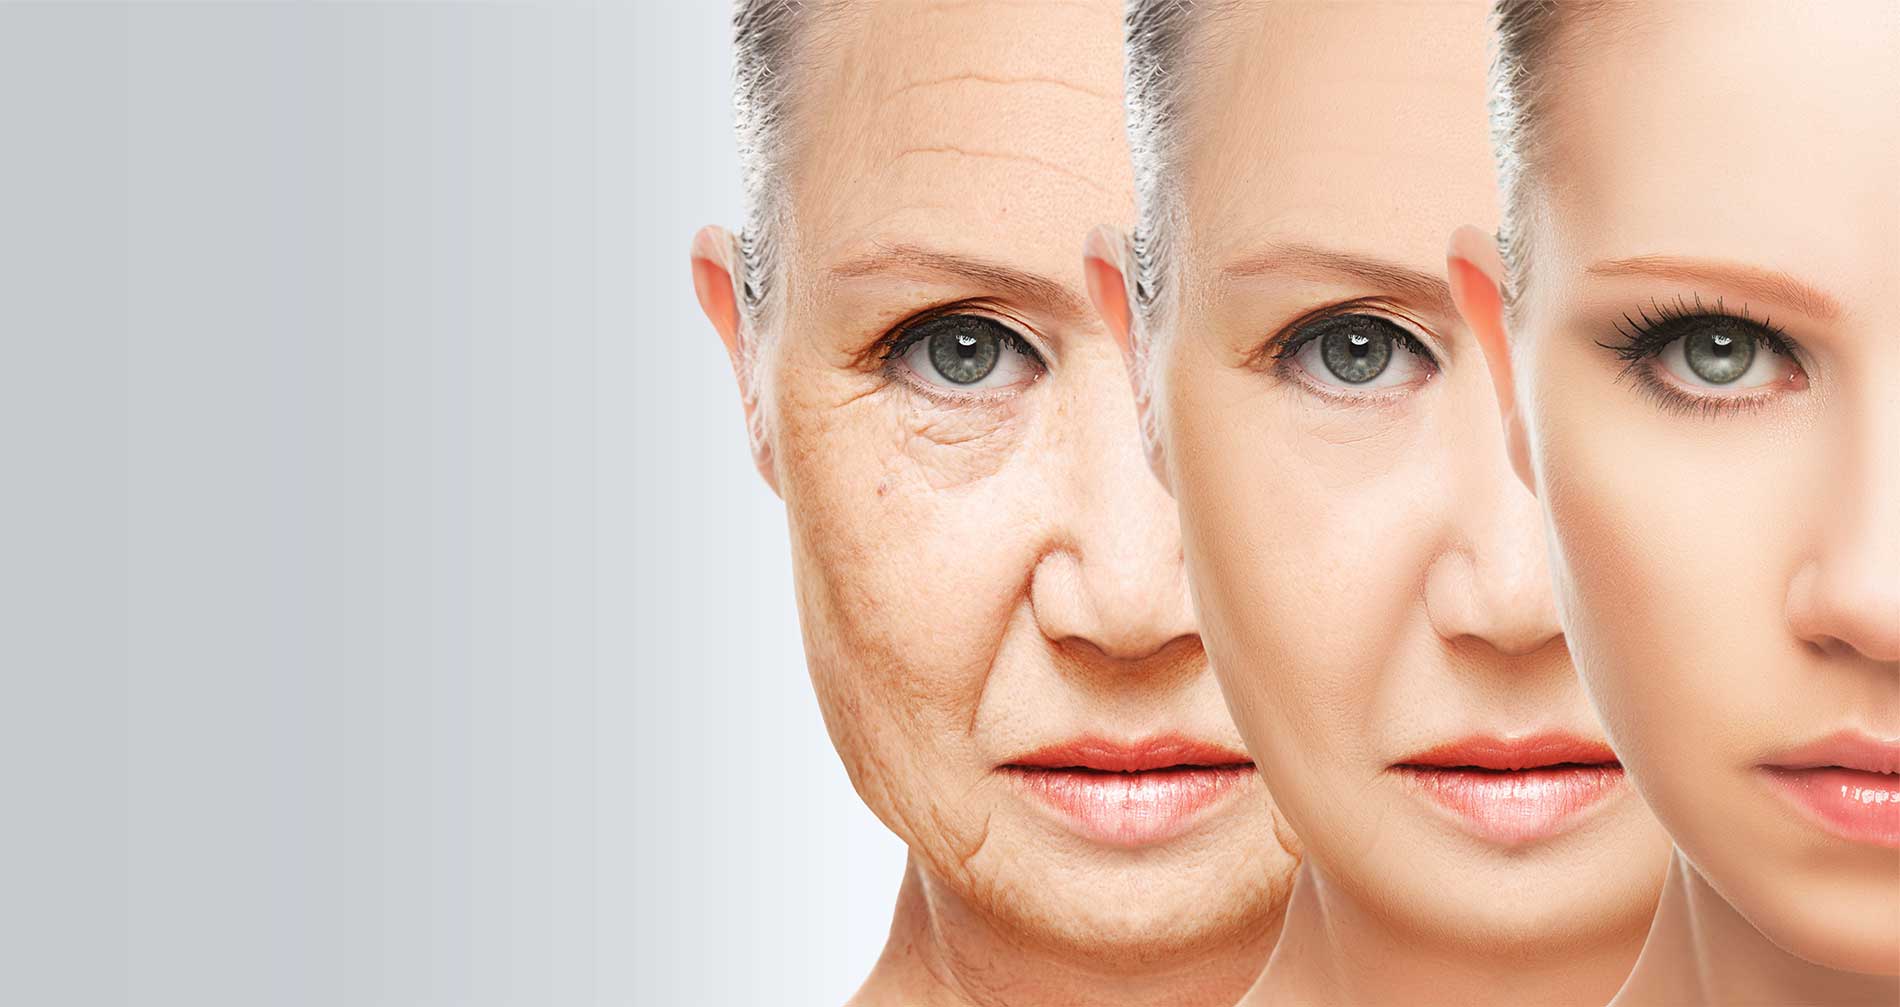 Anti Aging Treatment in India, Stem Cell Therapy for Anti Aging